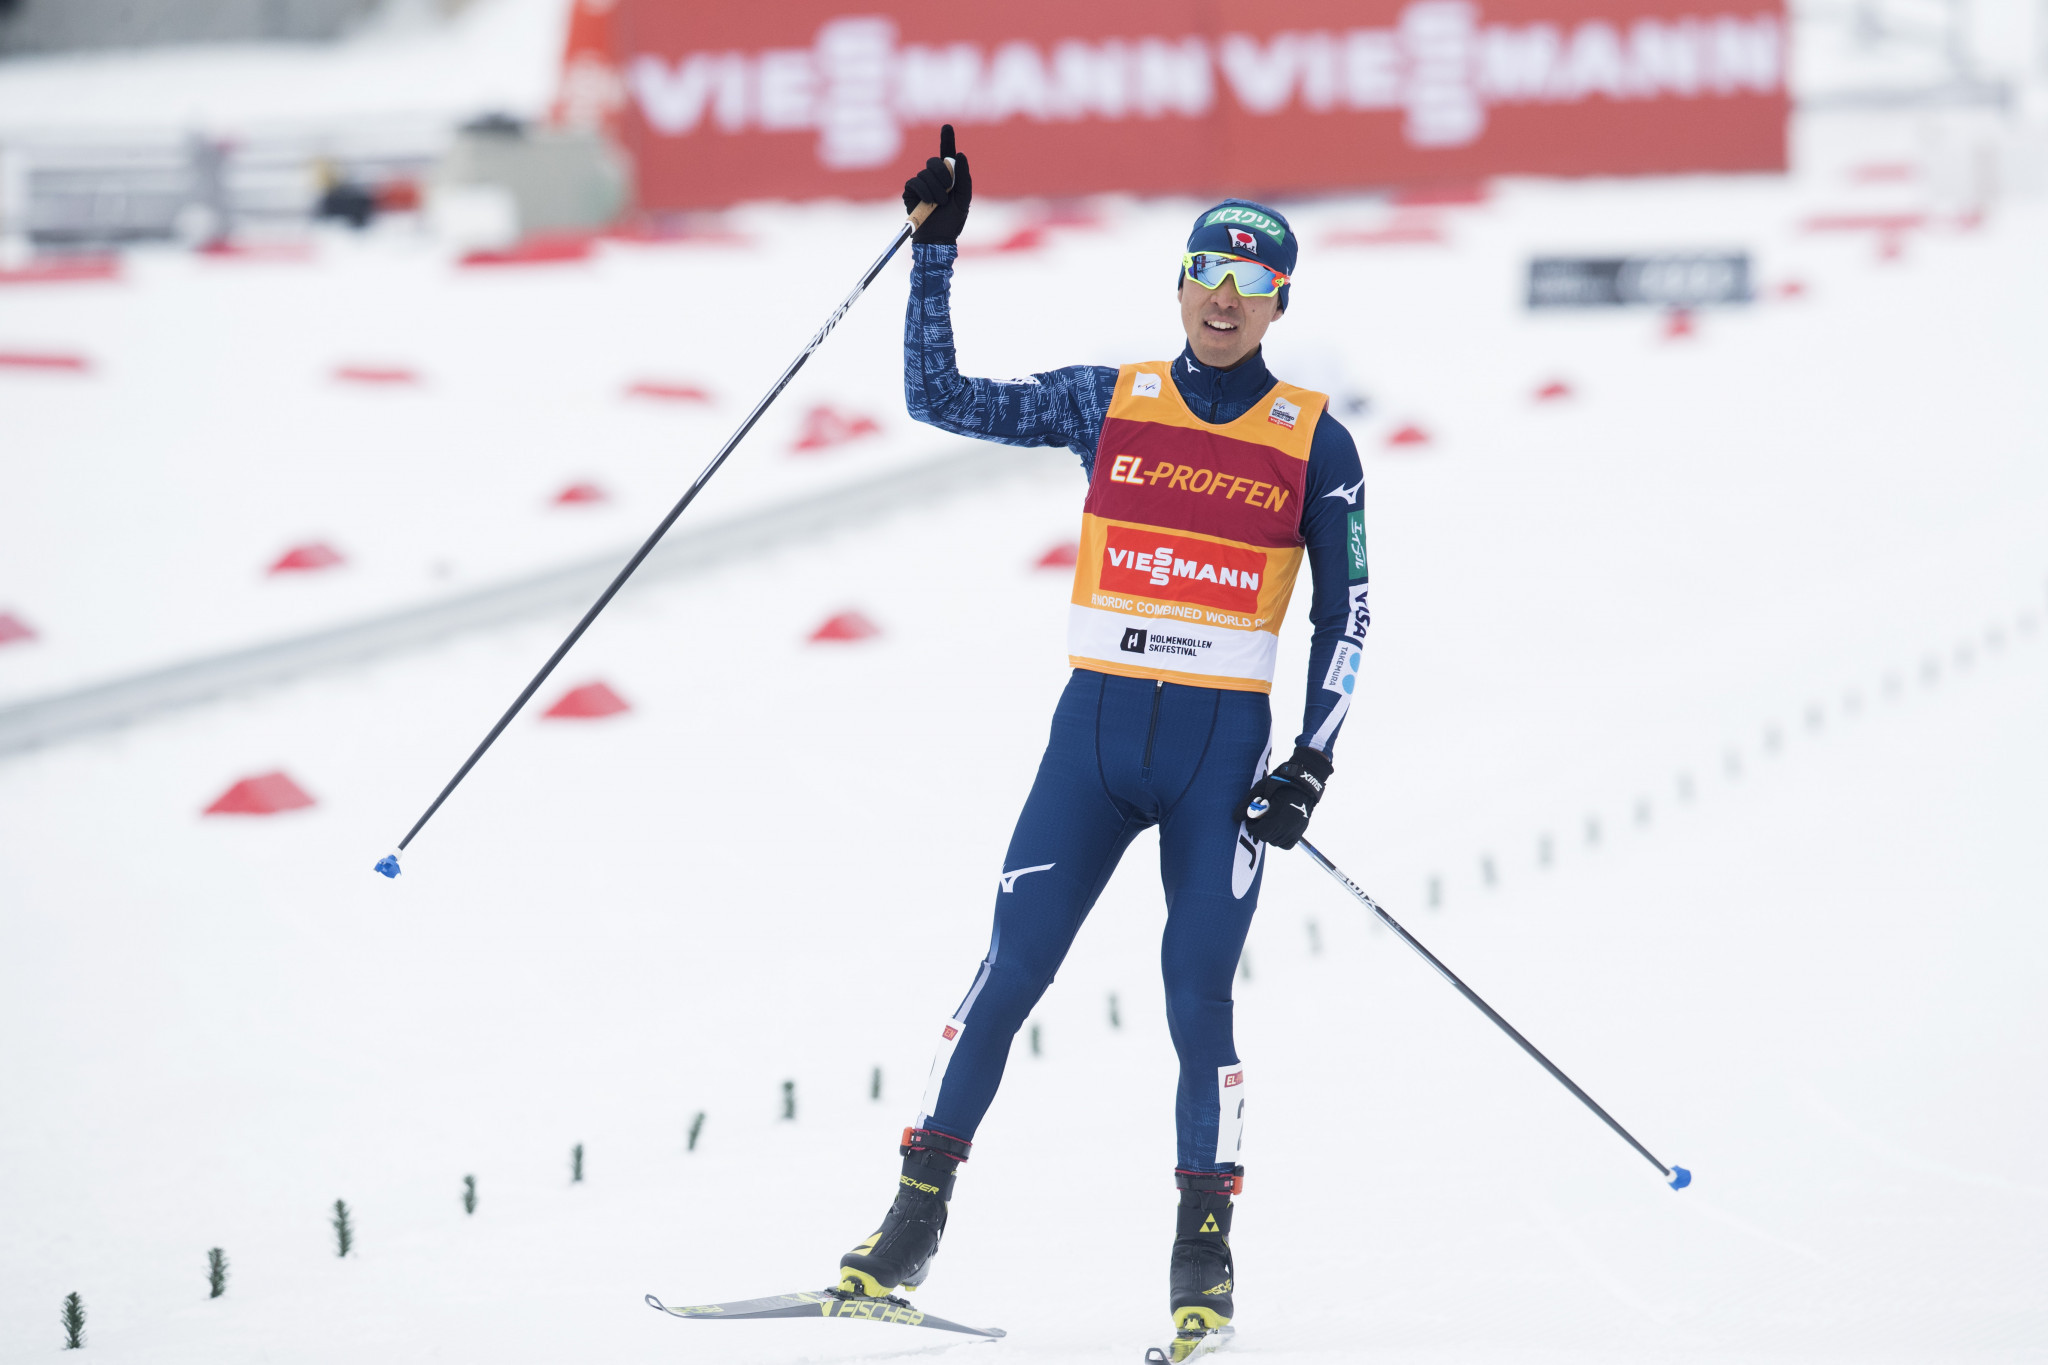 Japan's Akito Watabe goes into this weekend's FIS Nordic Combined World Cup finals knowing he has already earned the overall World Cup title ©Getty Images